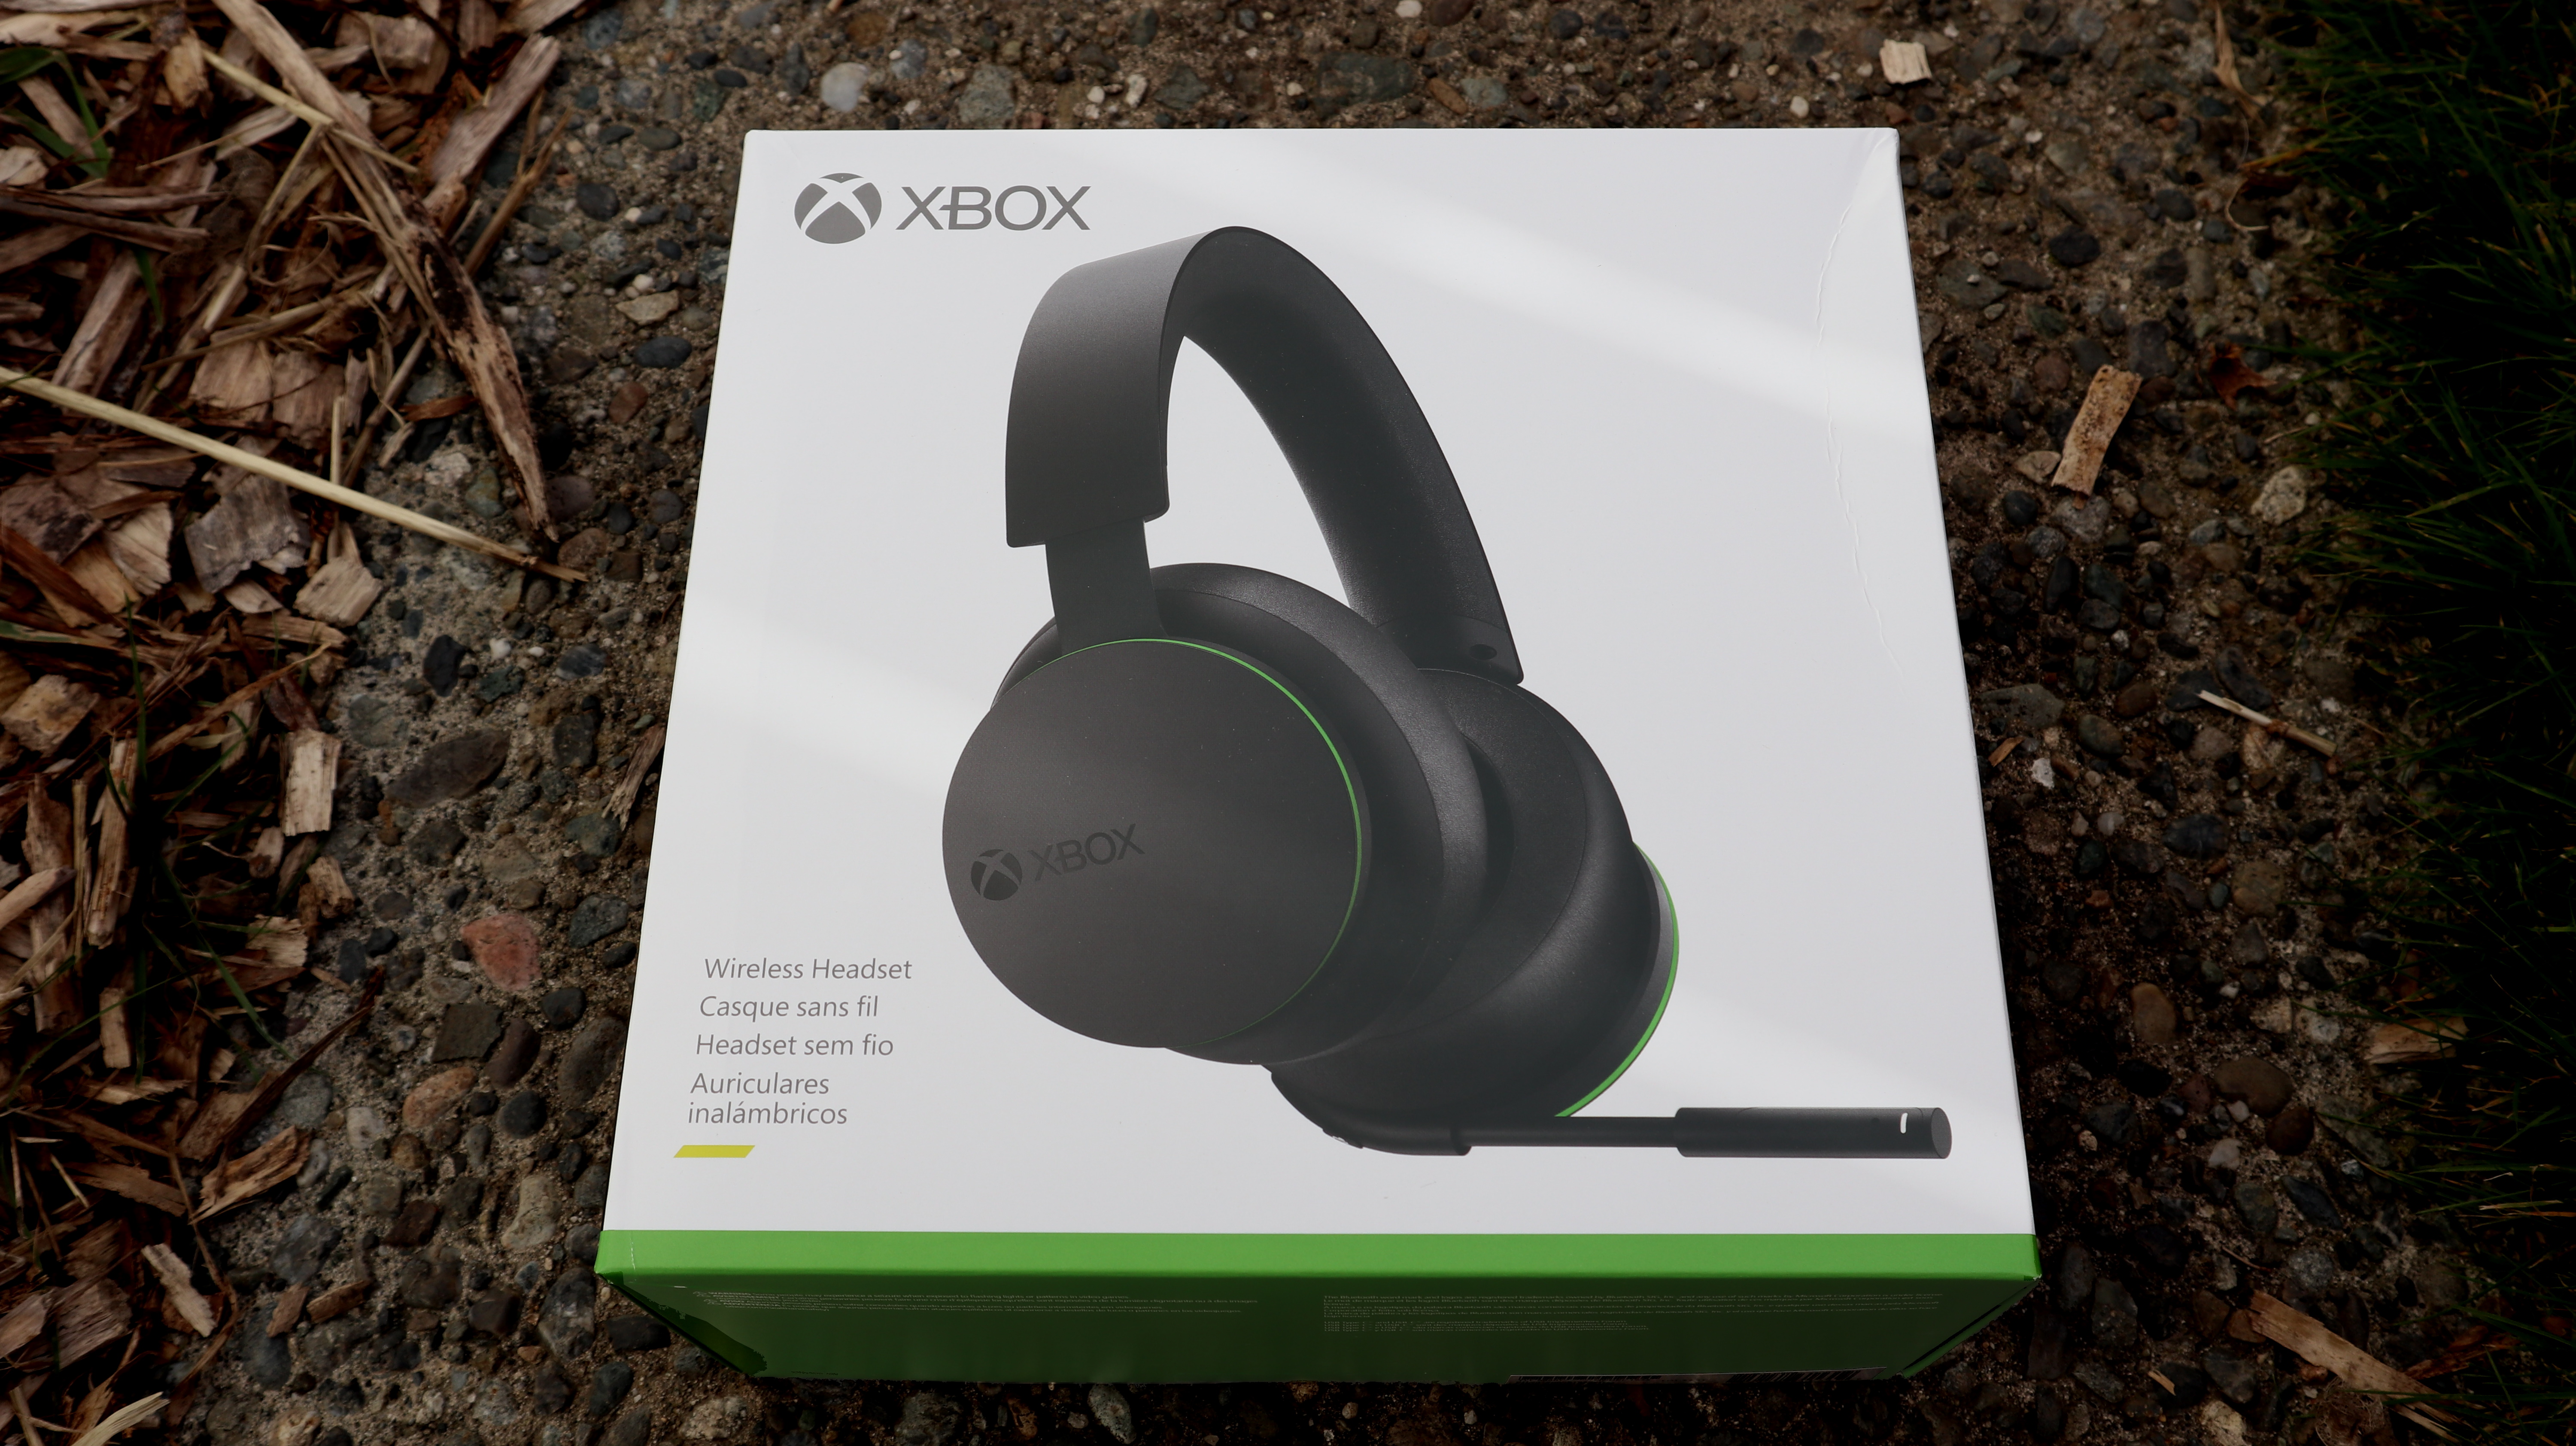 Official Xbox One / Series X Headset Stereo Genuine Microsoft NEW